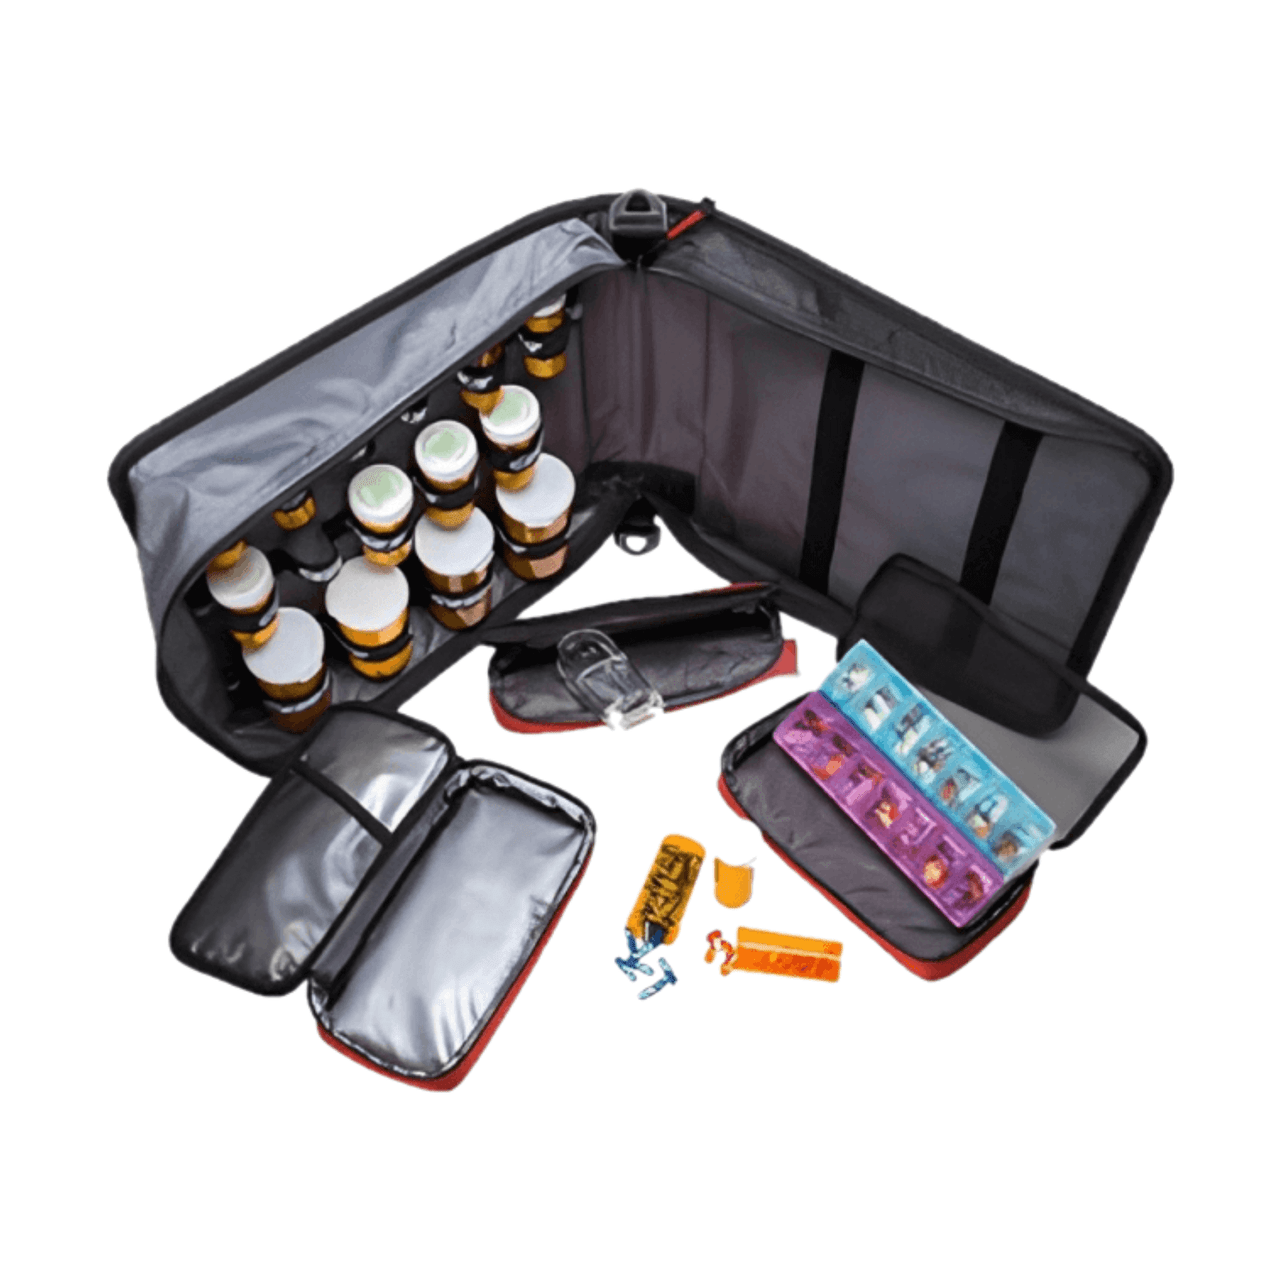 Medicine Supply Organizer with Insulin Cooler - Med Manager